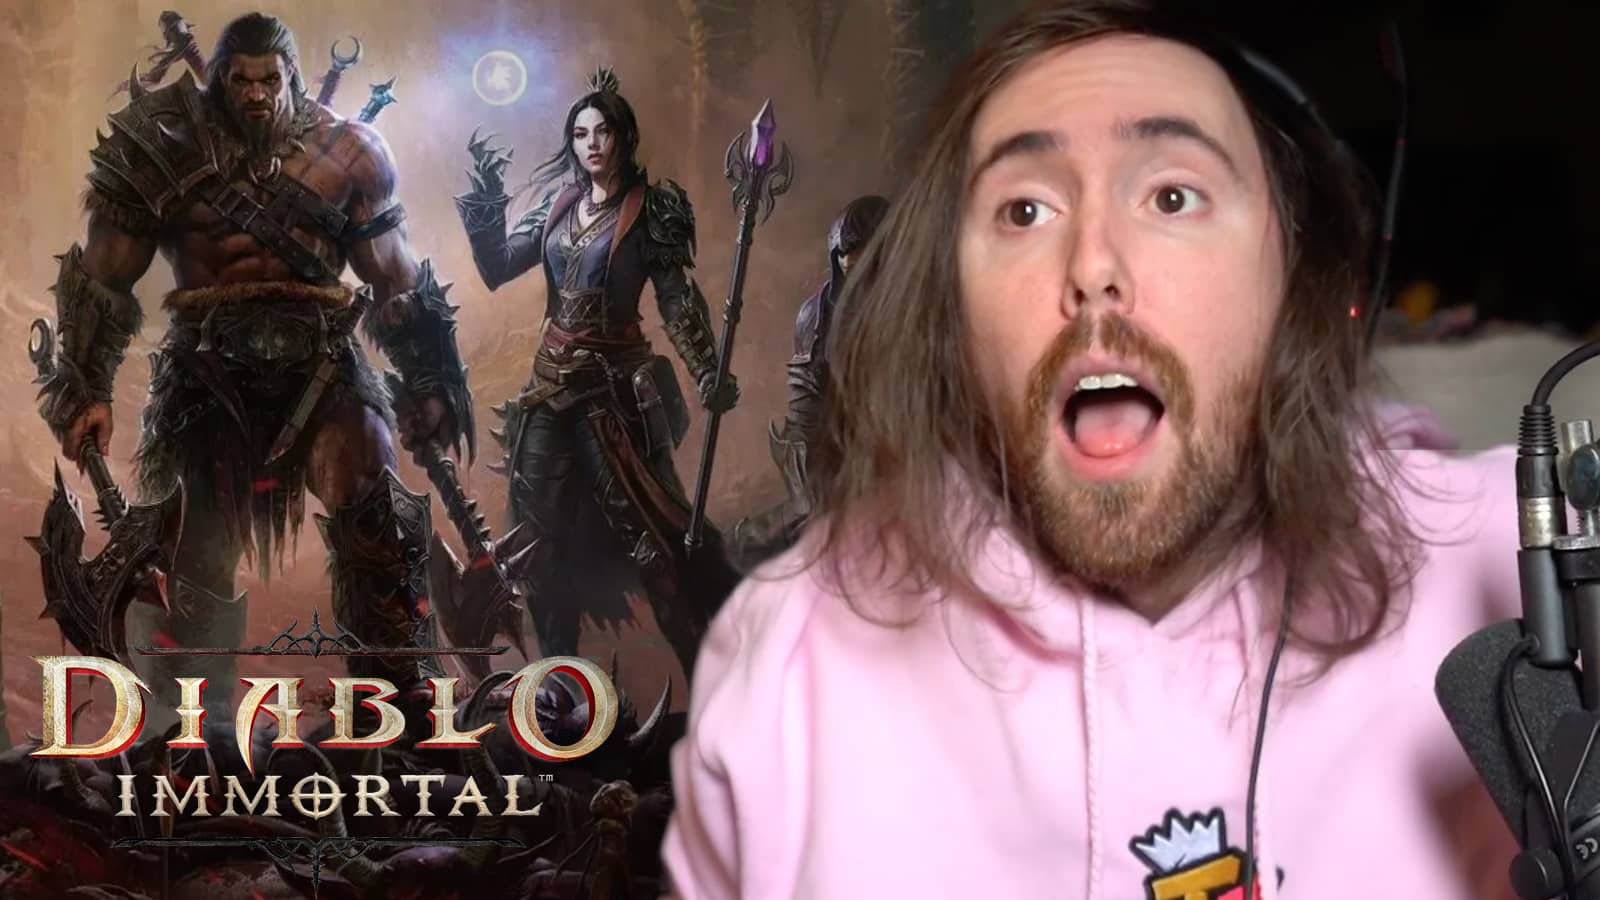 Twitch streamer McconnellRet provided his take on Diablo Immortal